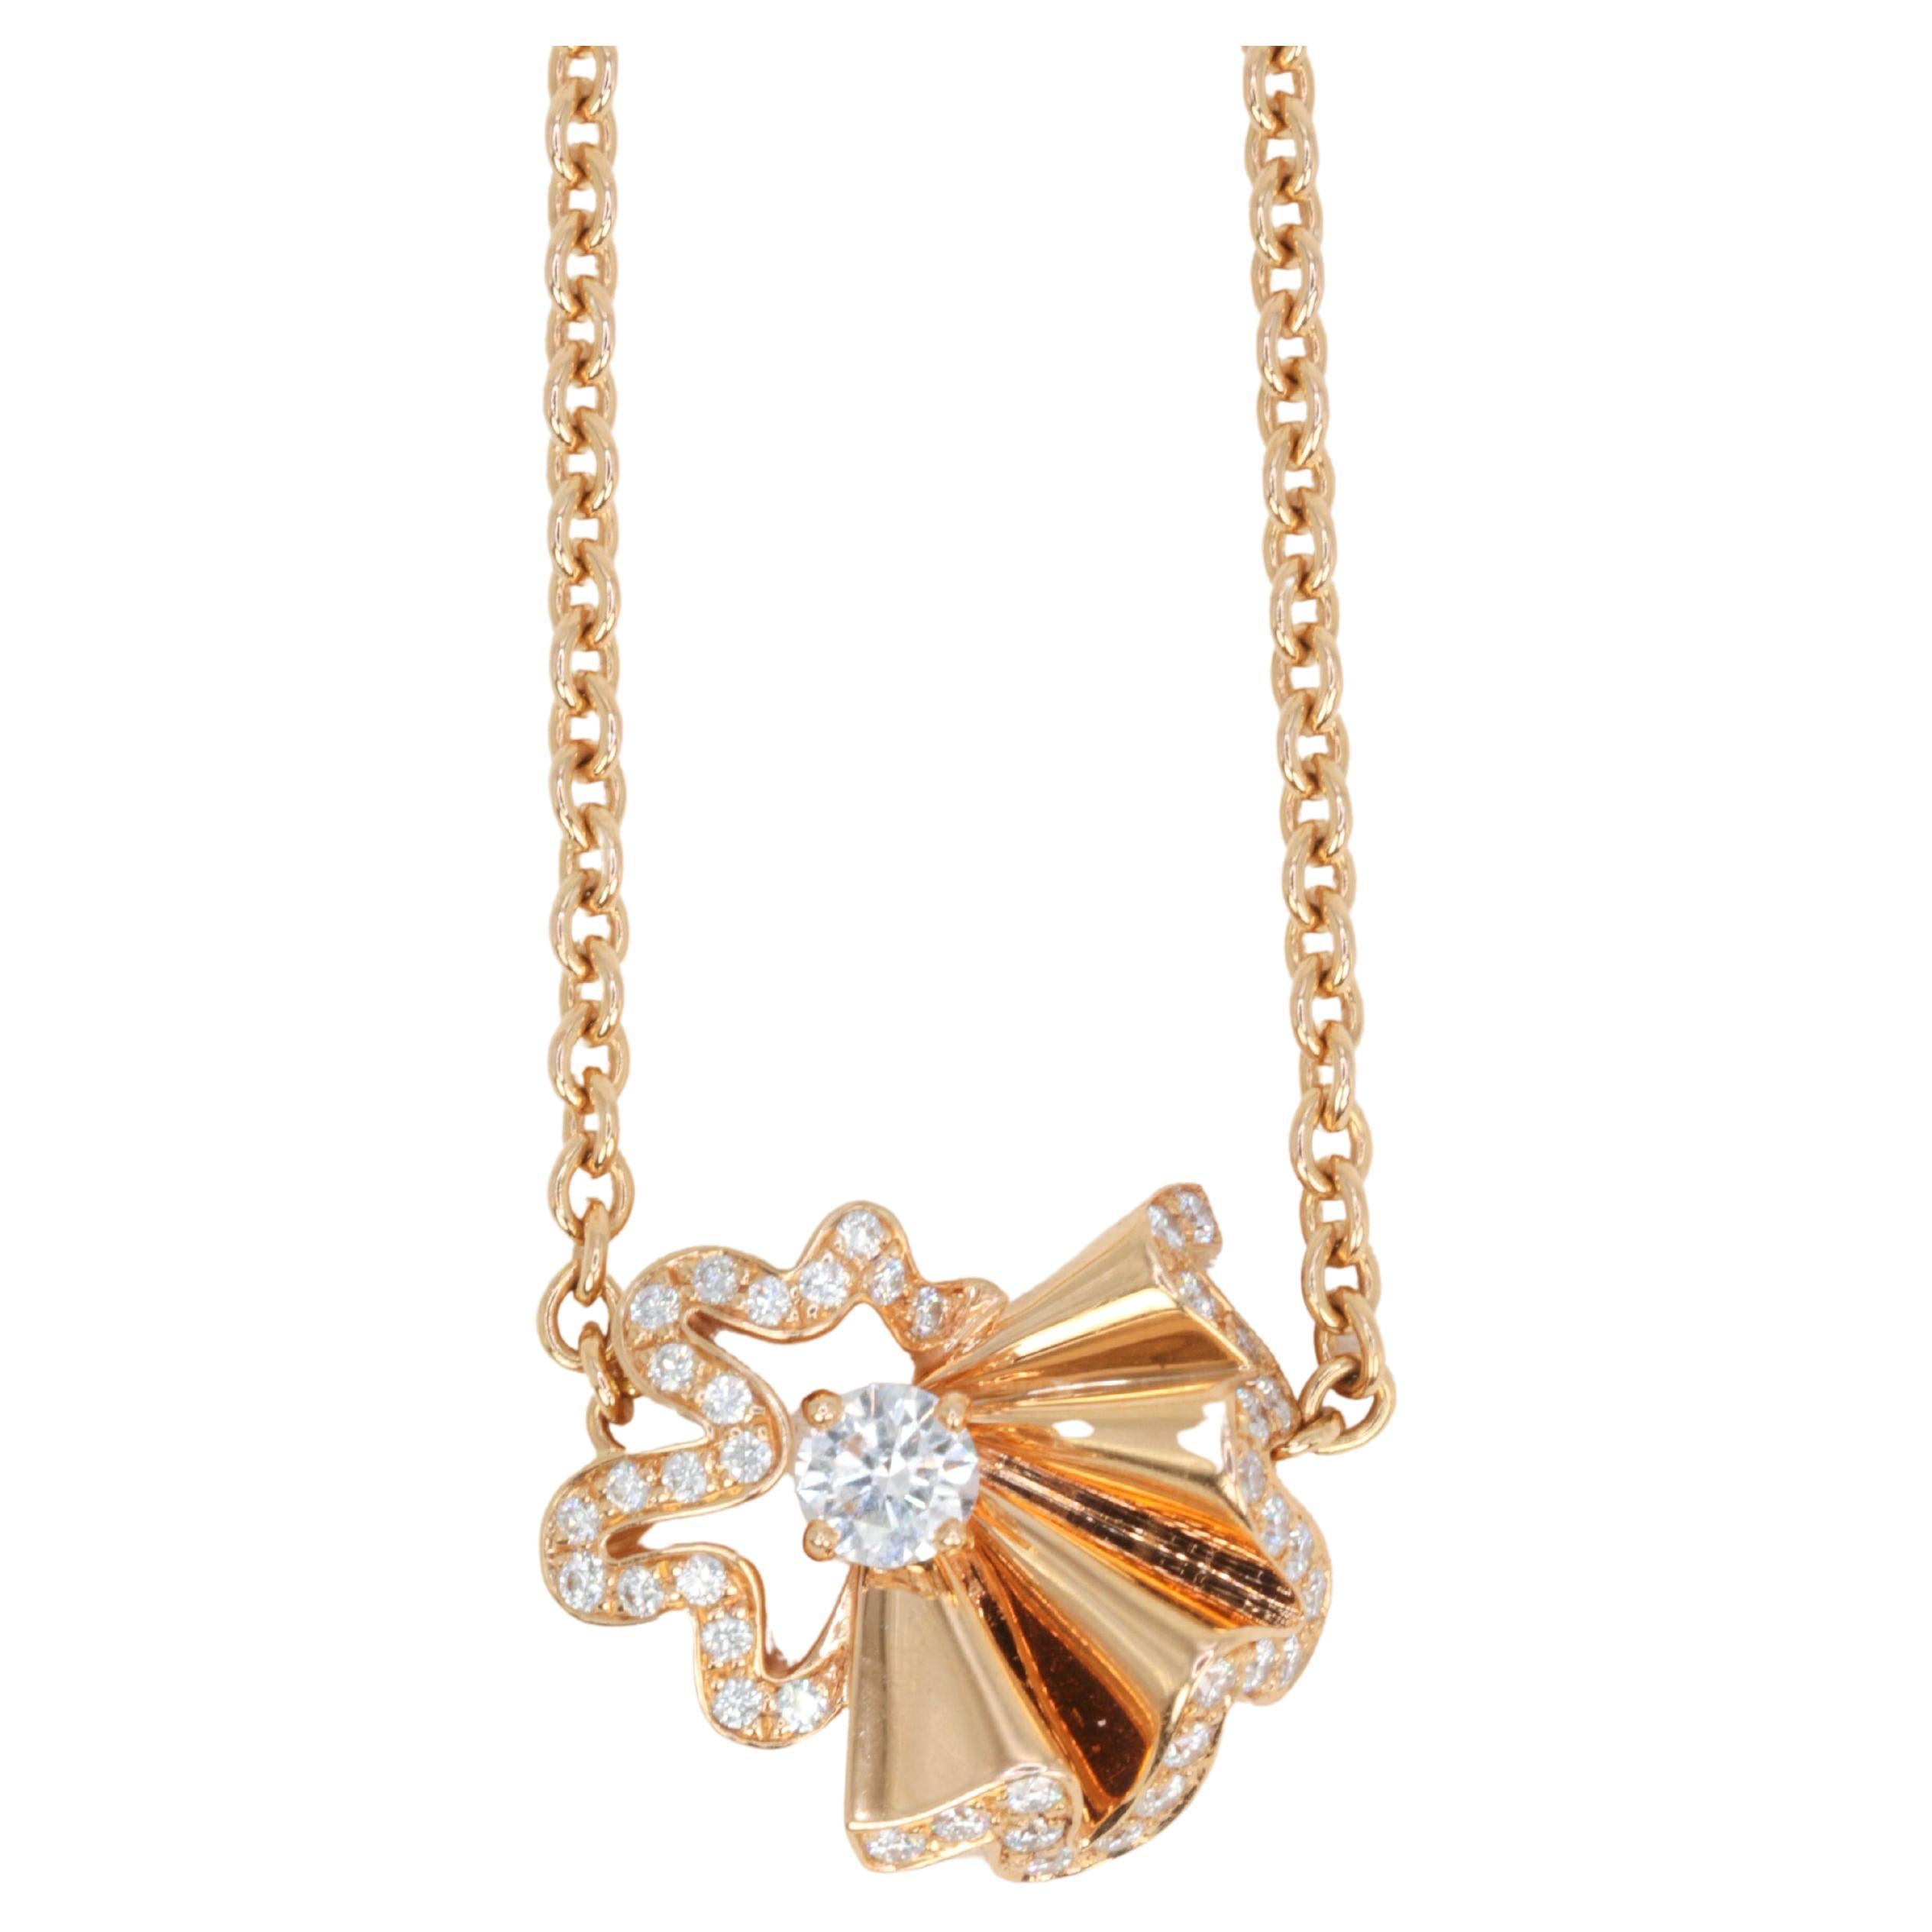 DIOR, rose gold and diamonds necklace, Archi Dior Cocotte collection 